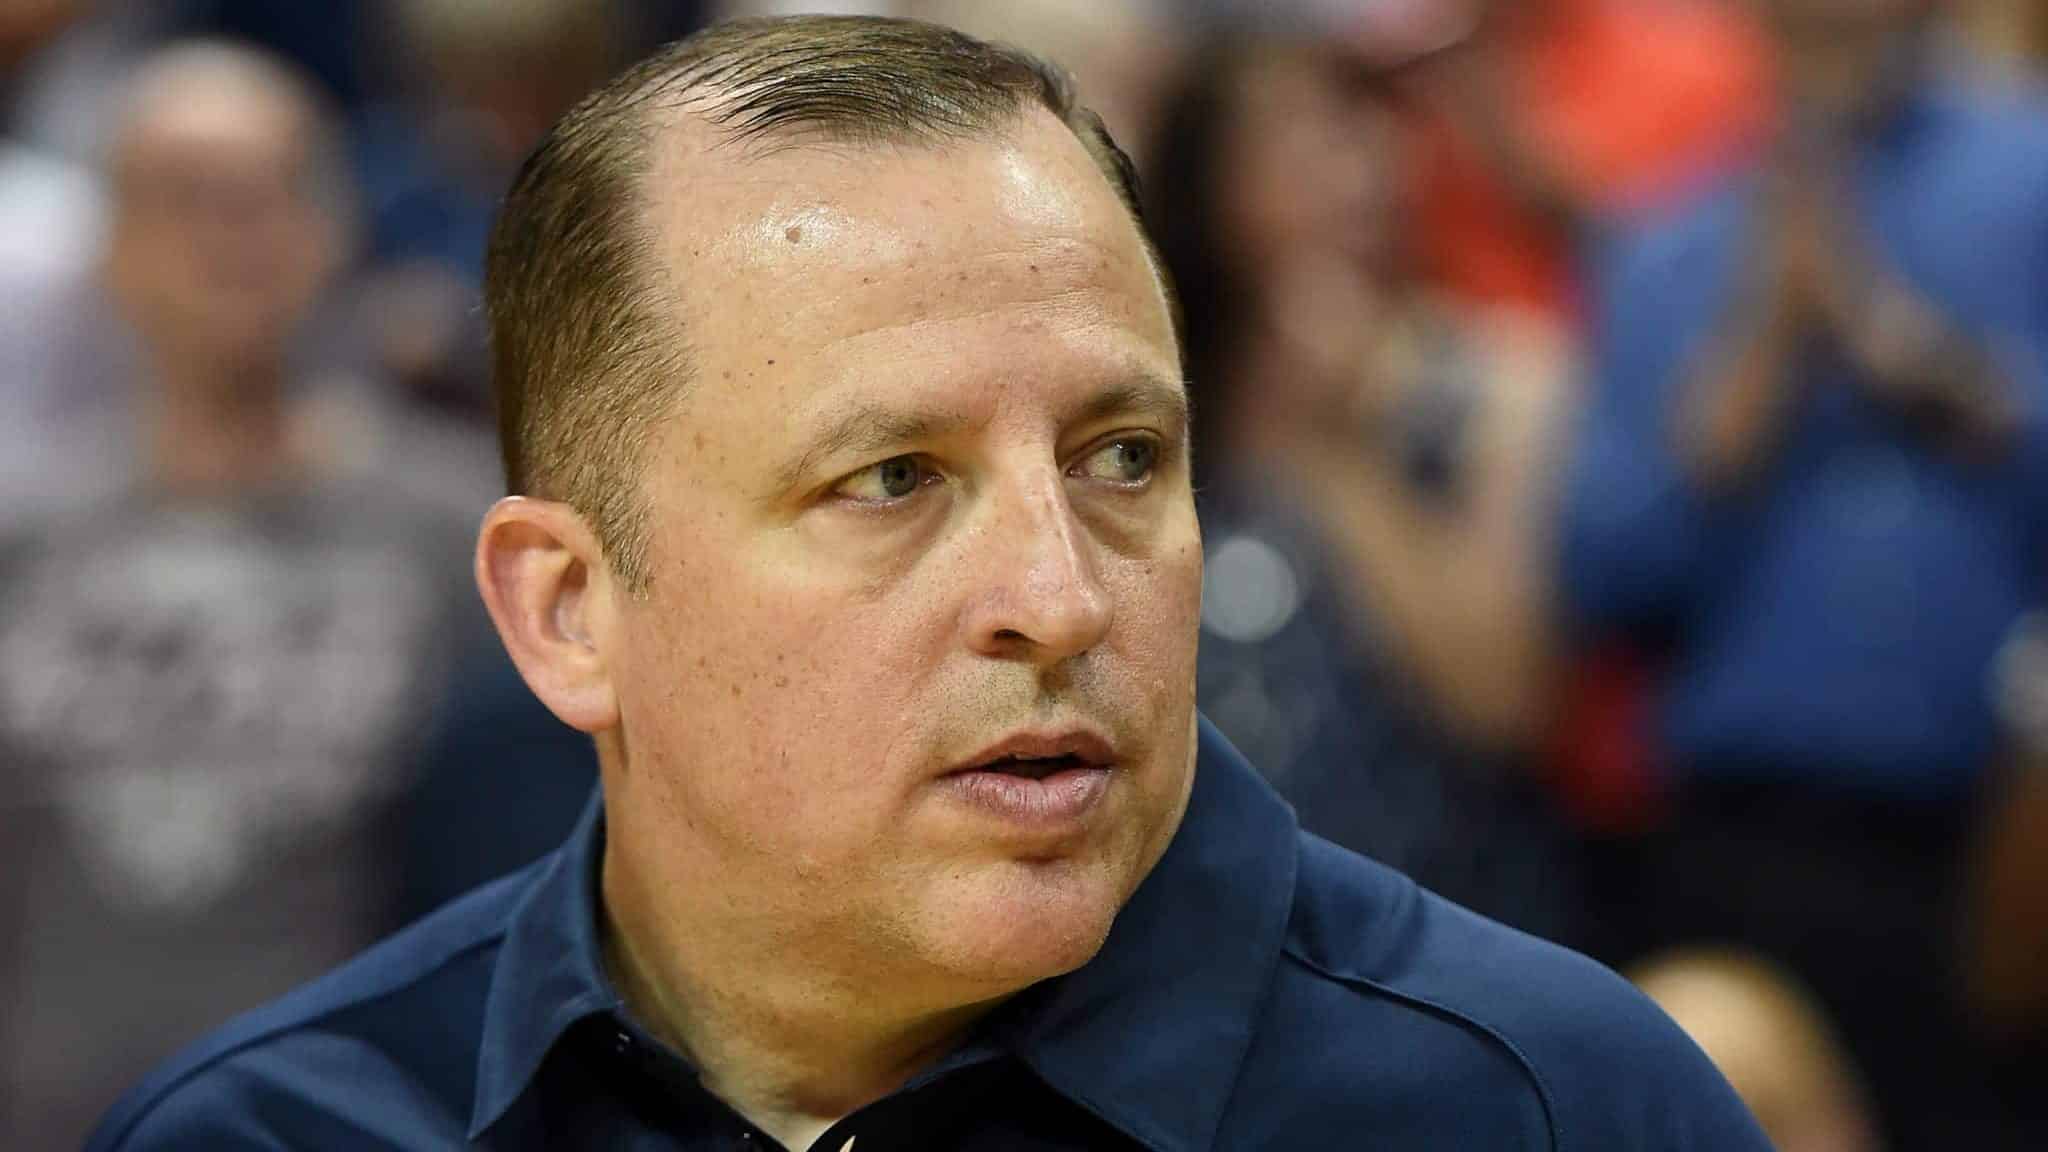 LAS VEGAS, NV - AUGUST 13: Assistant coach Tom Thibodeau of the 2015 USA Basketball Men's National Team watches his players warm up before a USA Basketball showcase at the Thomas & Mack Center on August 13, 2015 in Las Vegas, Nevada.